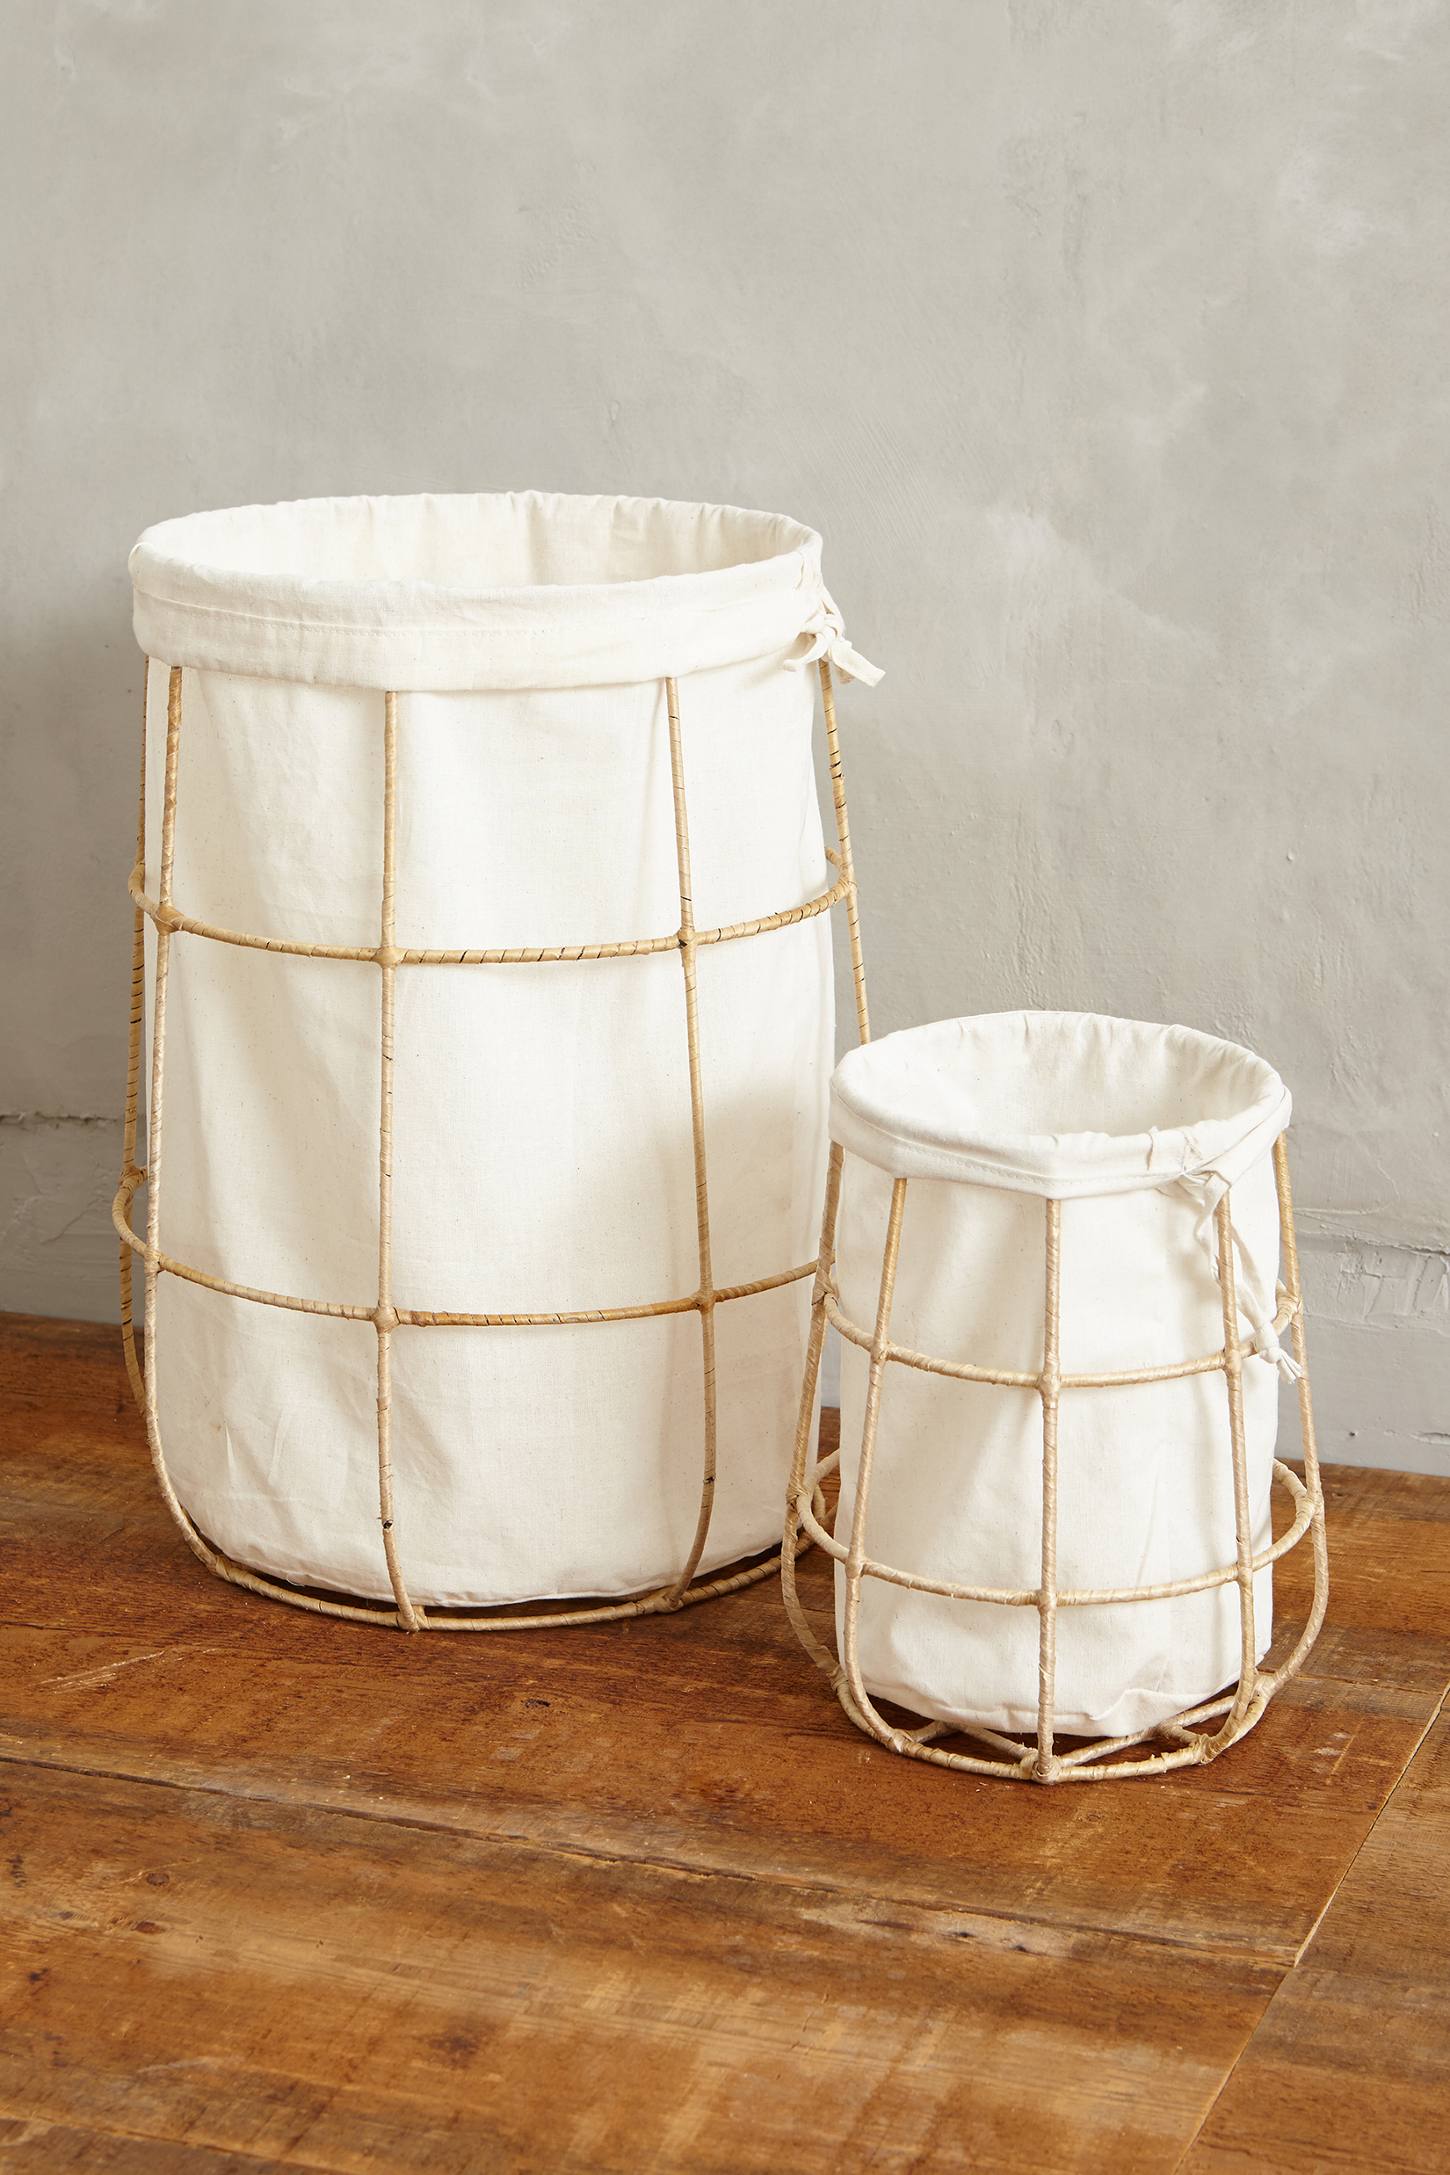 Grid and linen laundry basket from Anthropologie